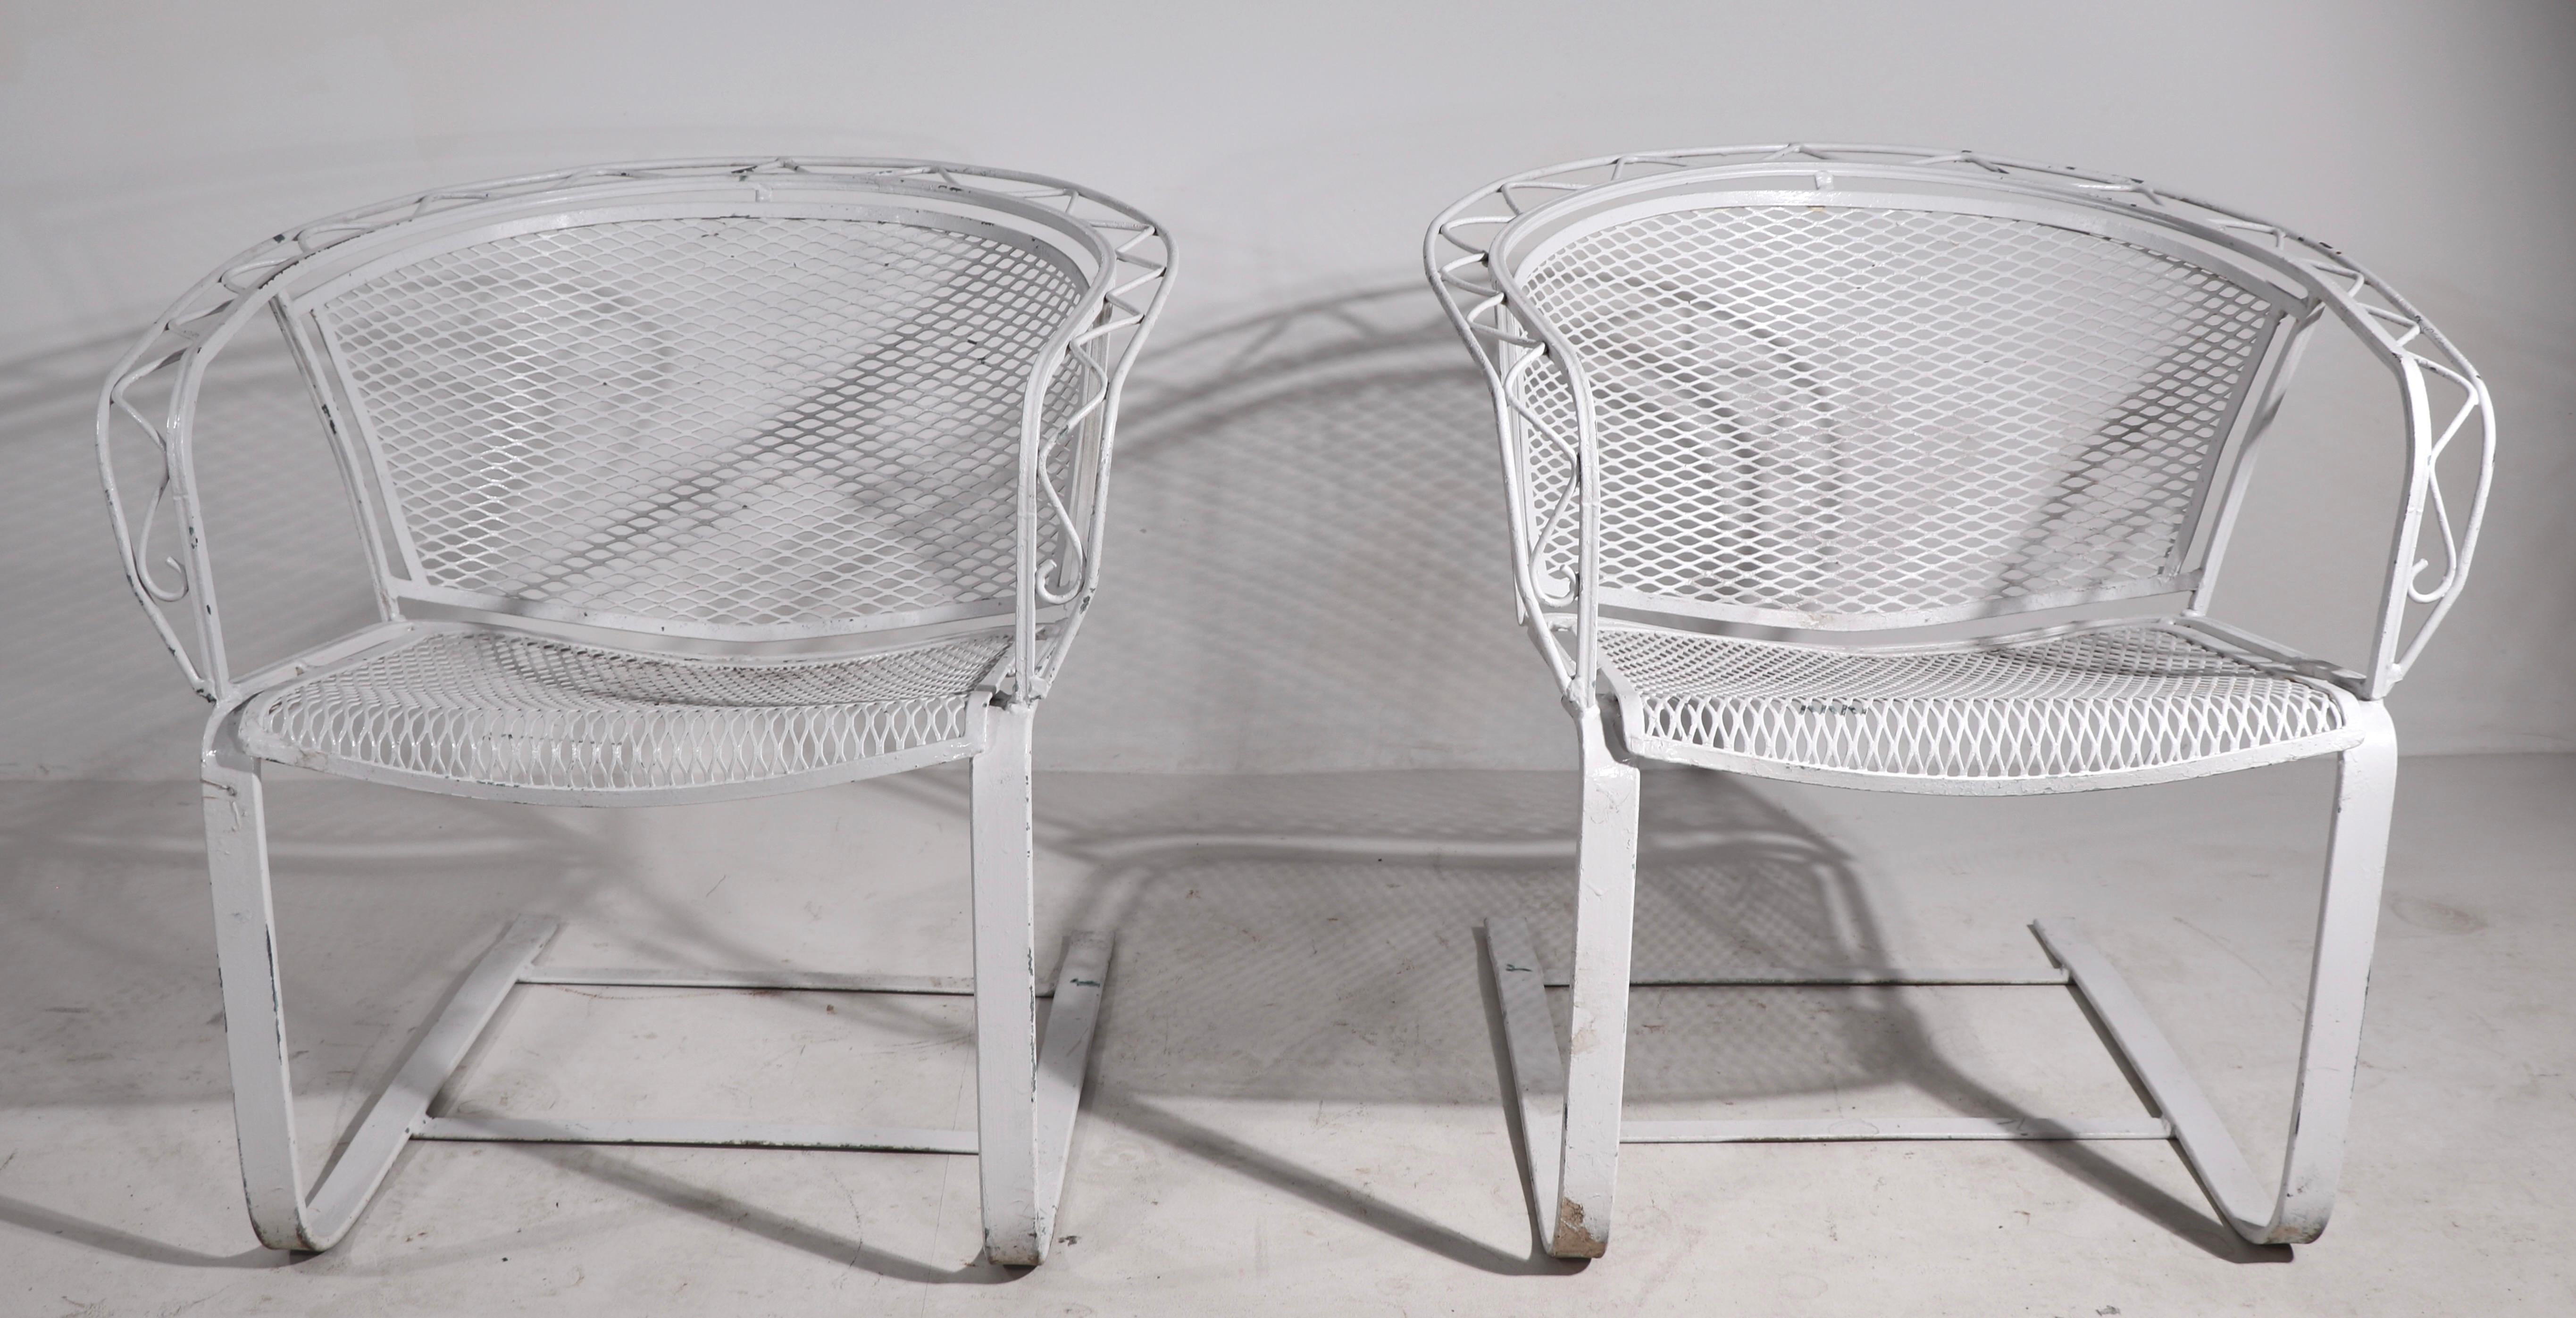 20th Century Pr Cantilevered Garden Patio Poolside Chairs by Salterini 